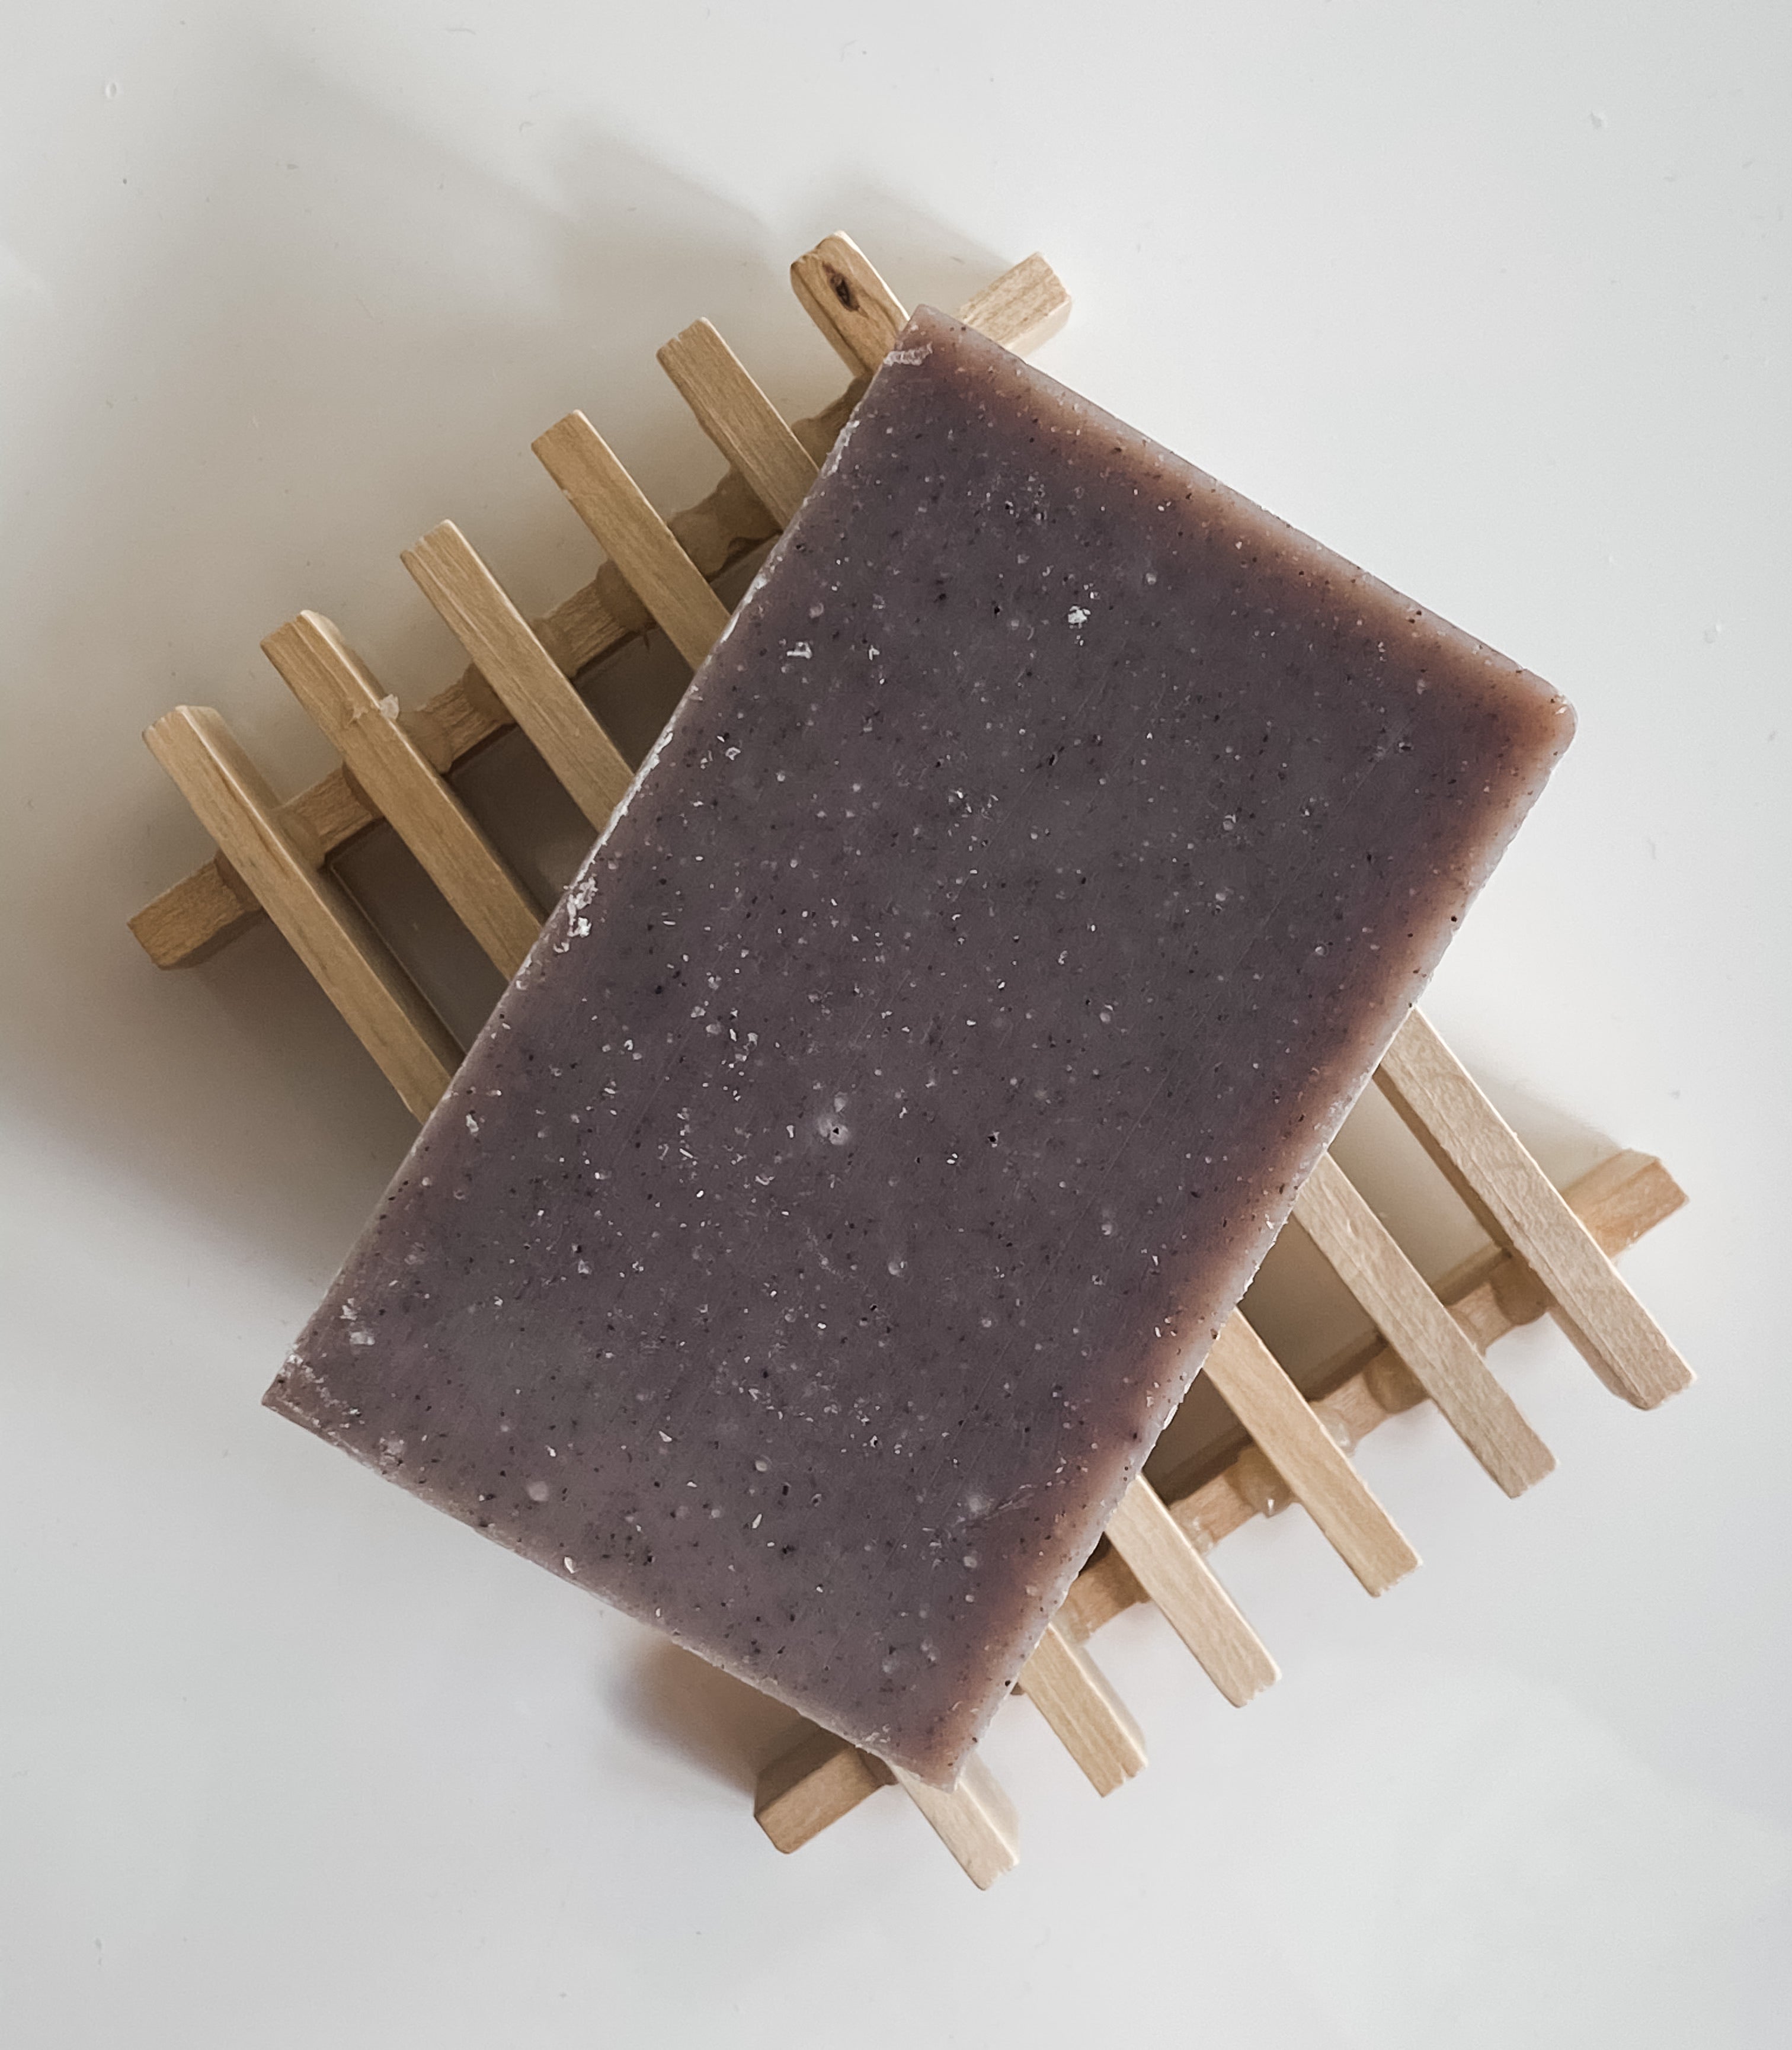 Tree Stay Dry Soap Dish - Handmade with Natural Ingredients. Hidden Forest Naturals